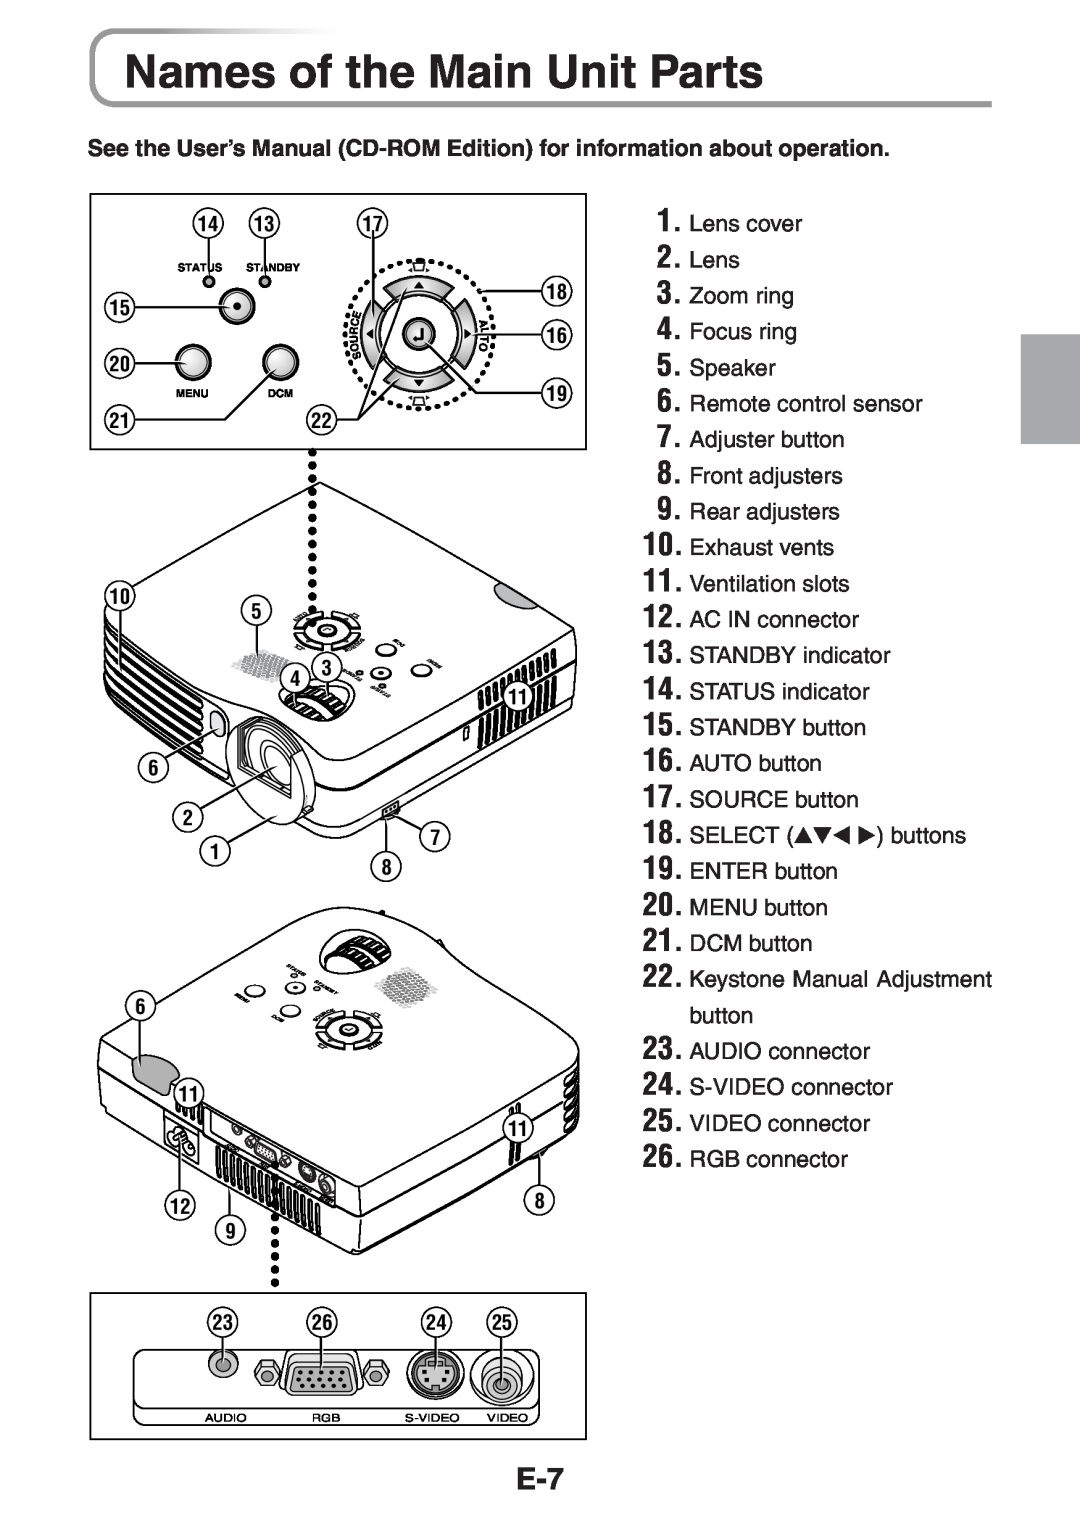 3M PX5 Names of the Main Unit Parts, See the User’s Manual CD-ROM Edition for information about operation, Lens cover 